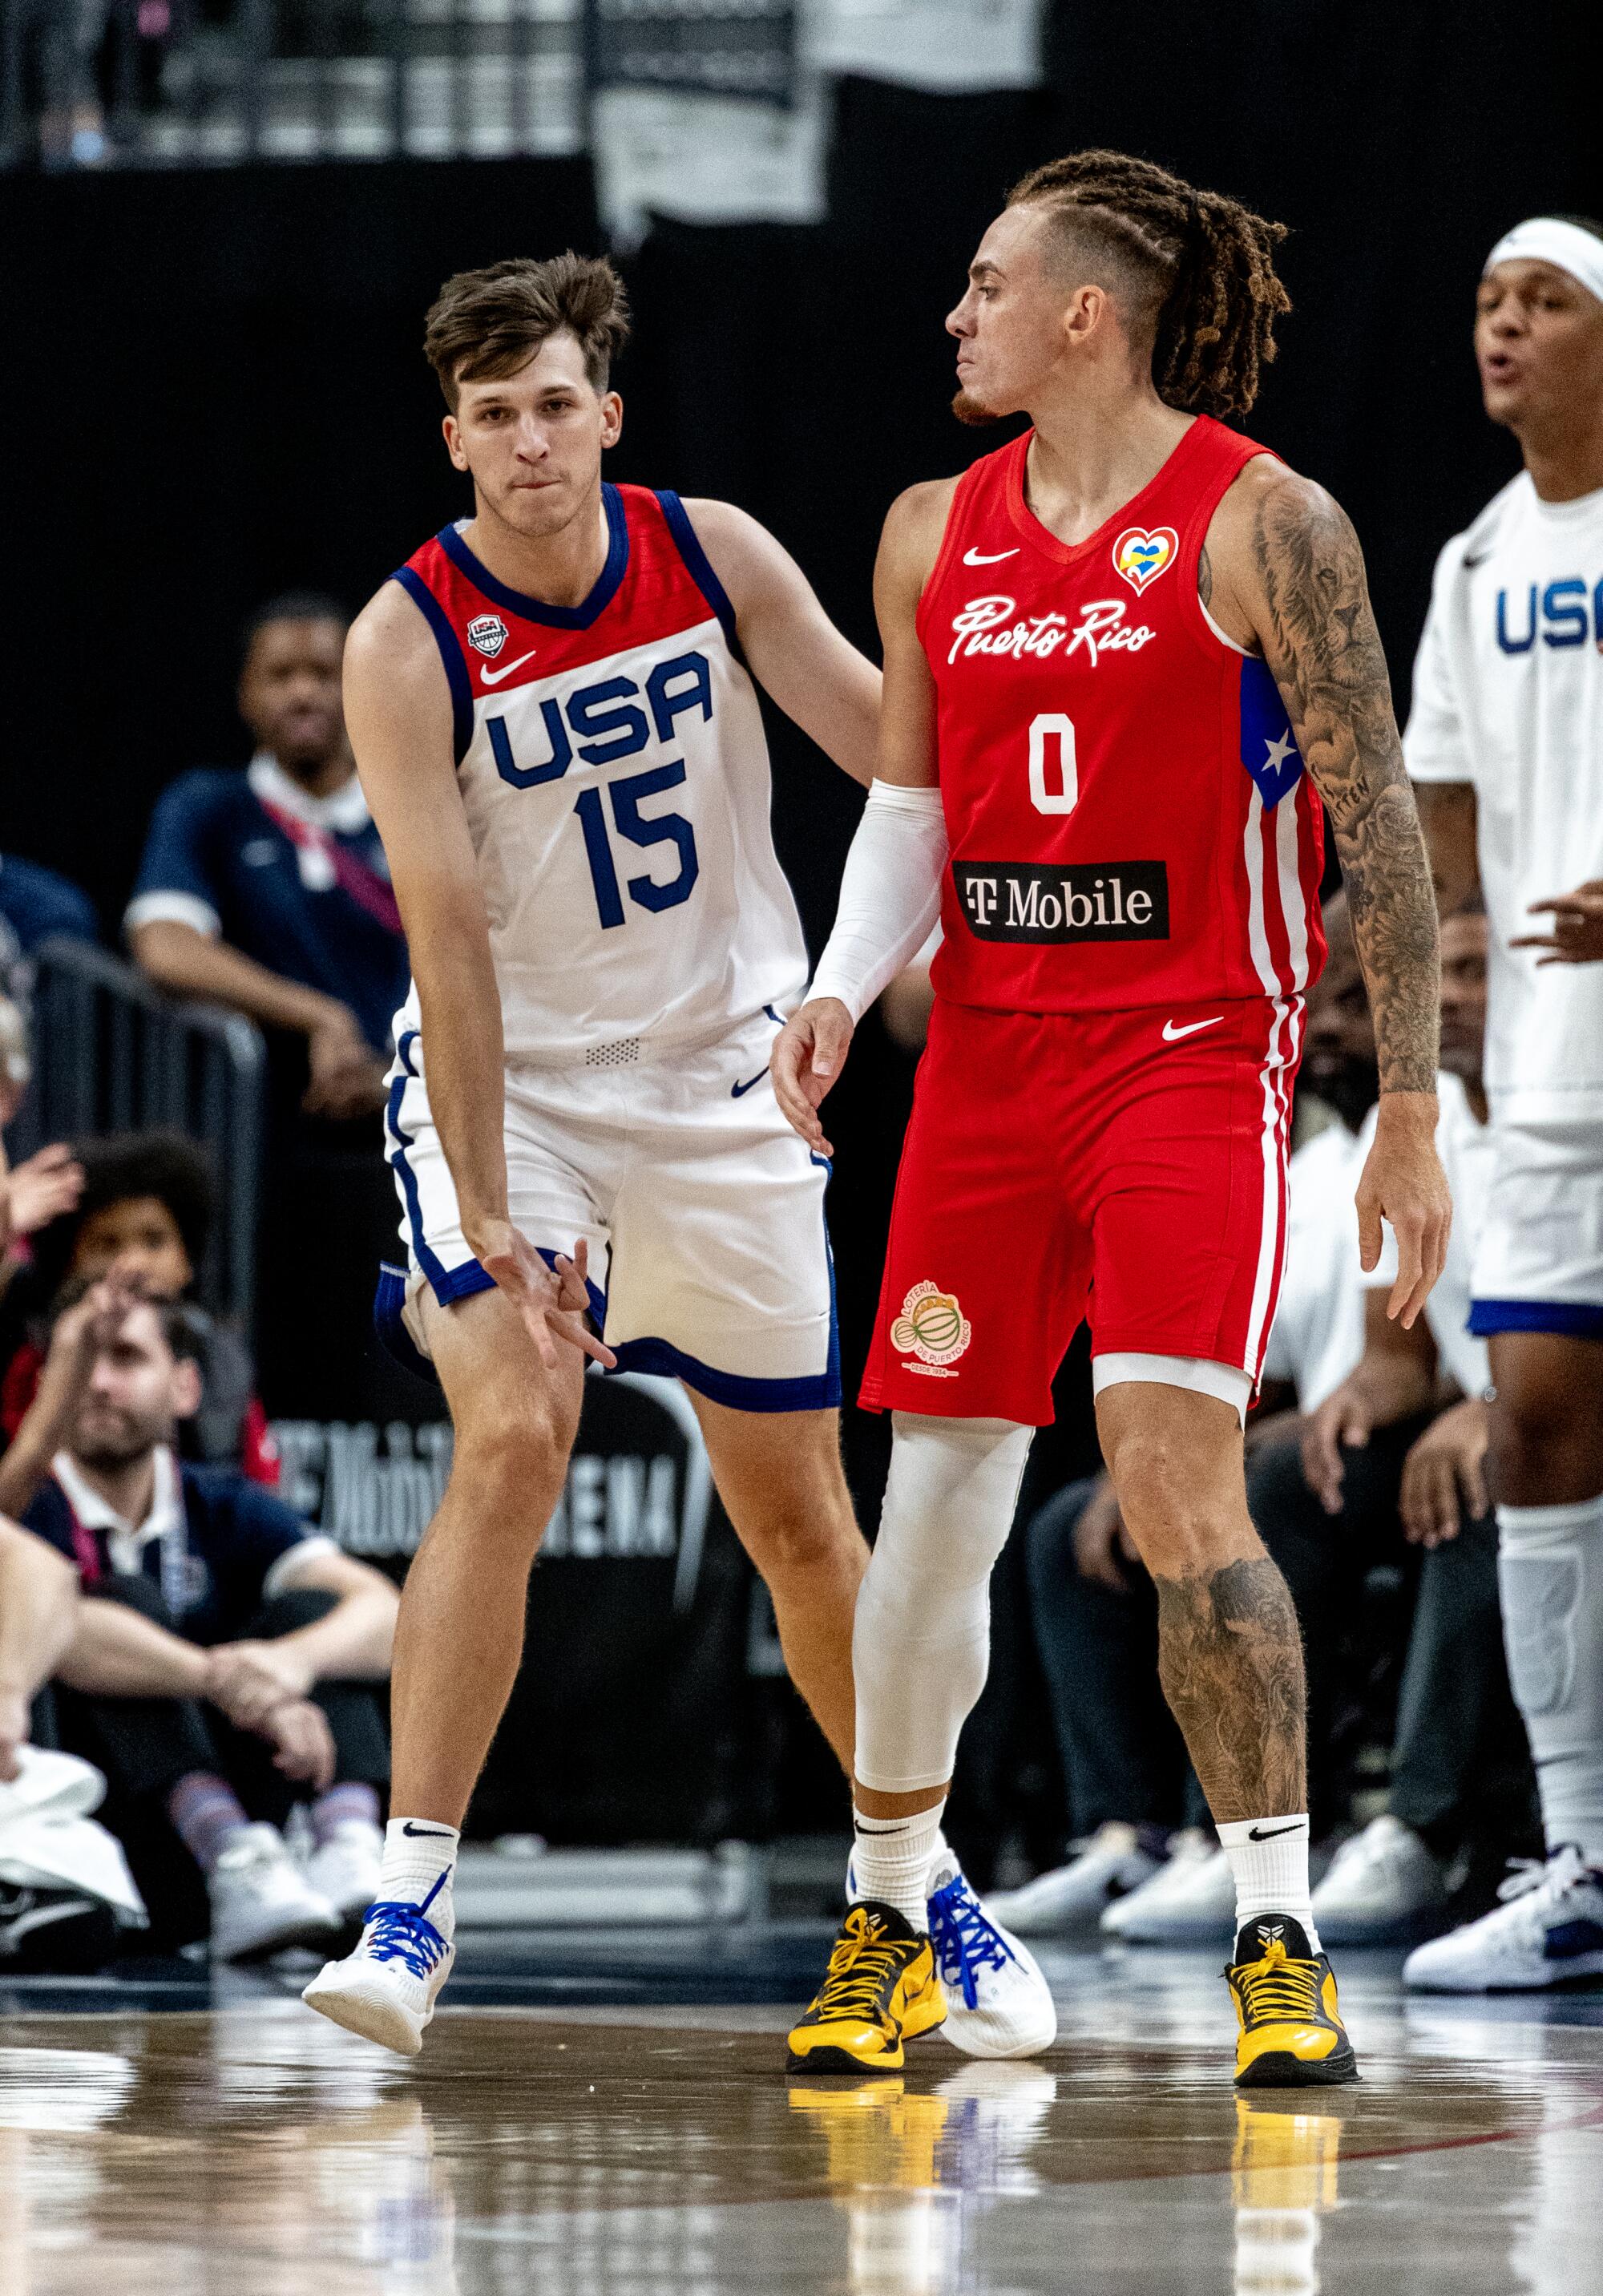 Team USA guard Austin Reaves strikes his signature "freeze" pose after making a three-pointer against Puerto Rico.